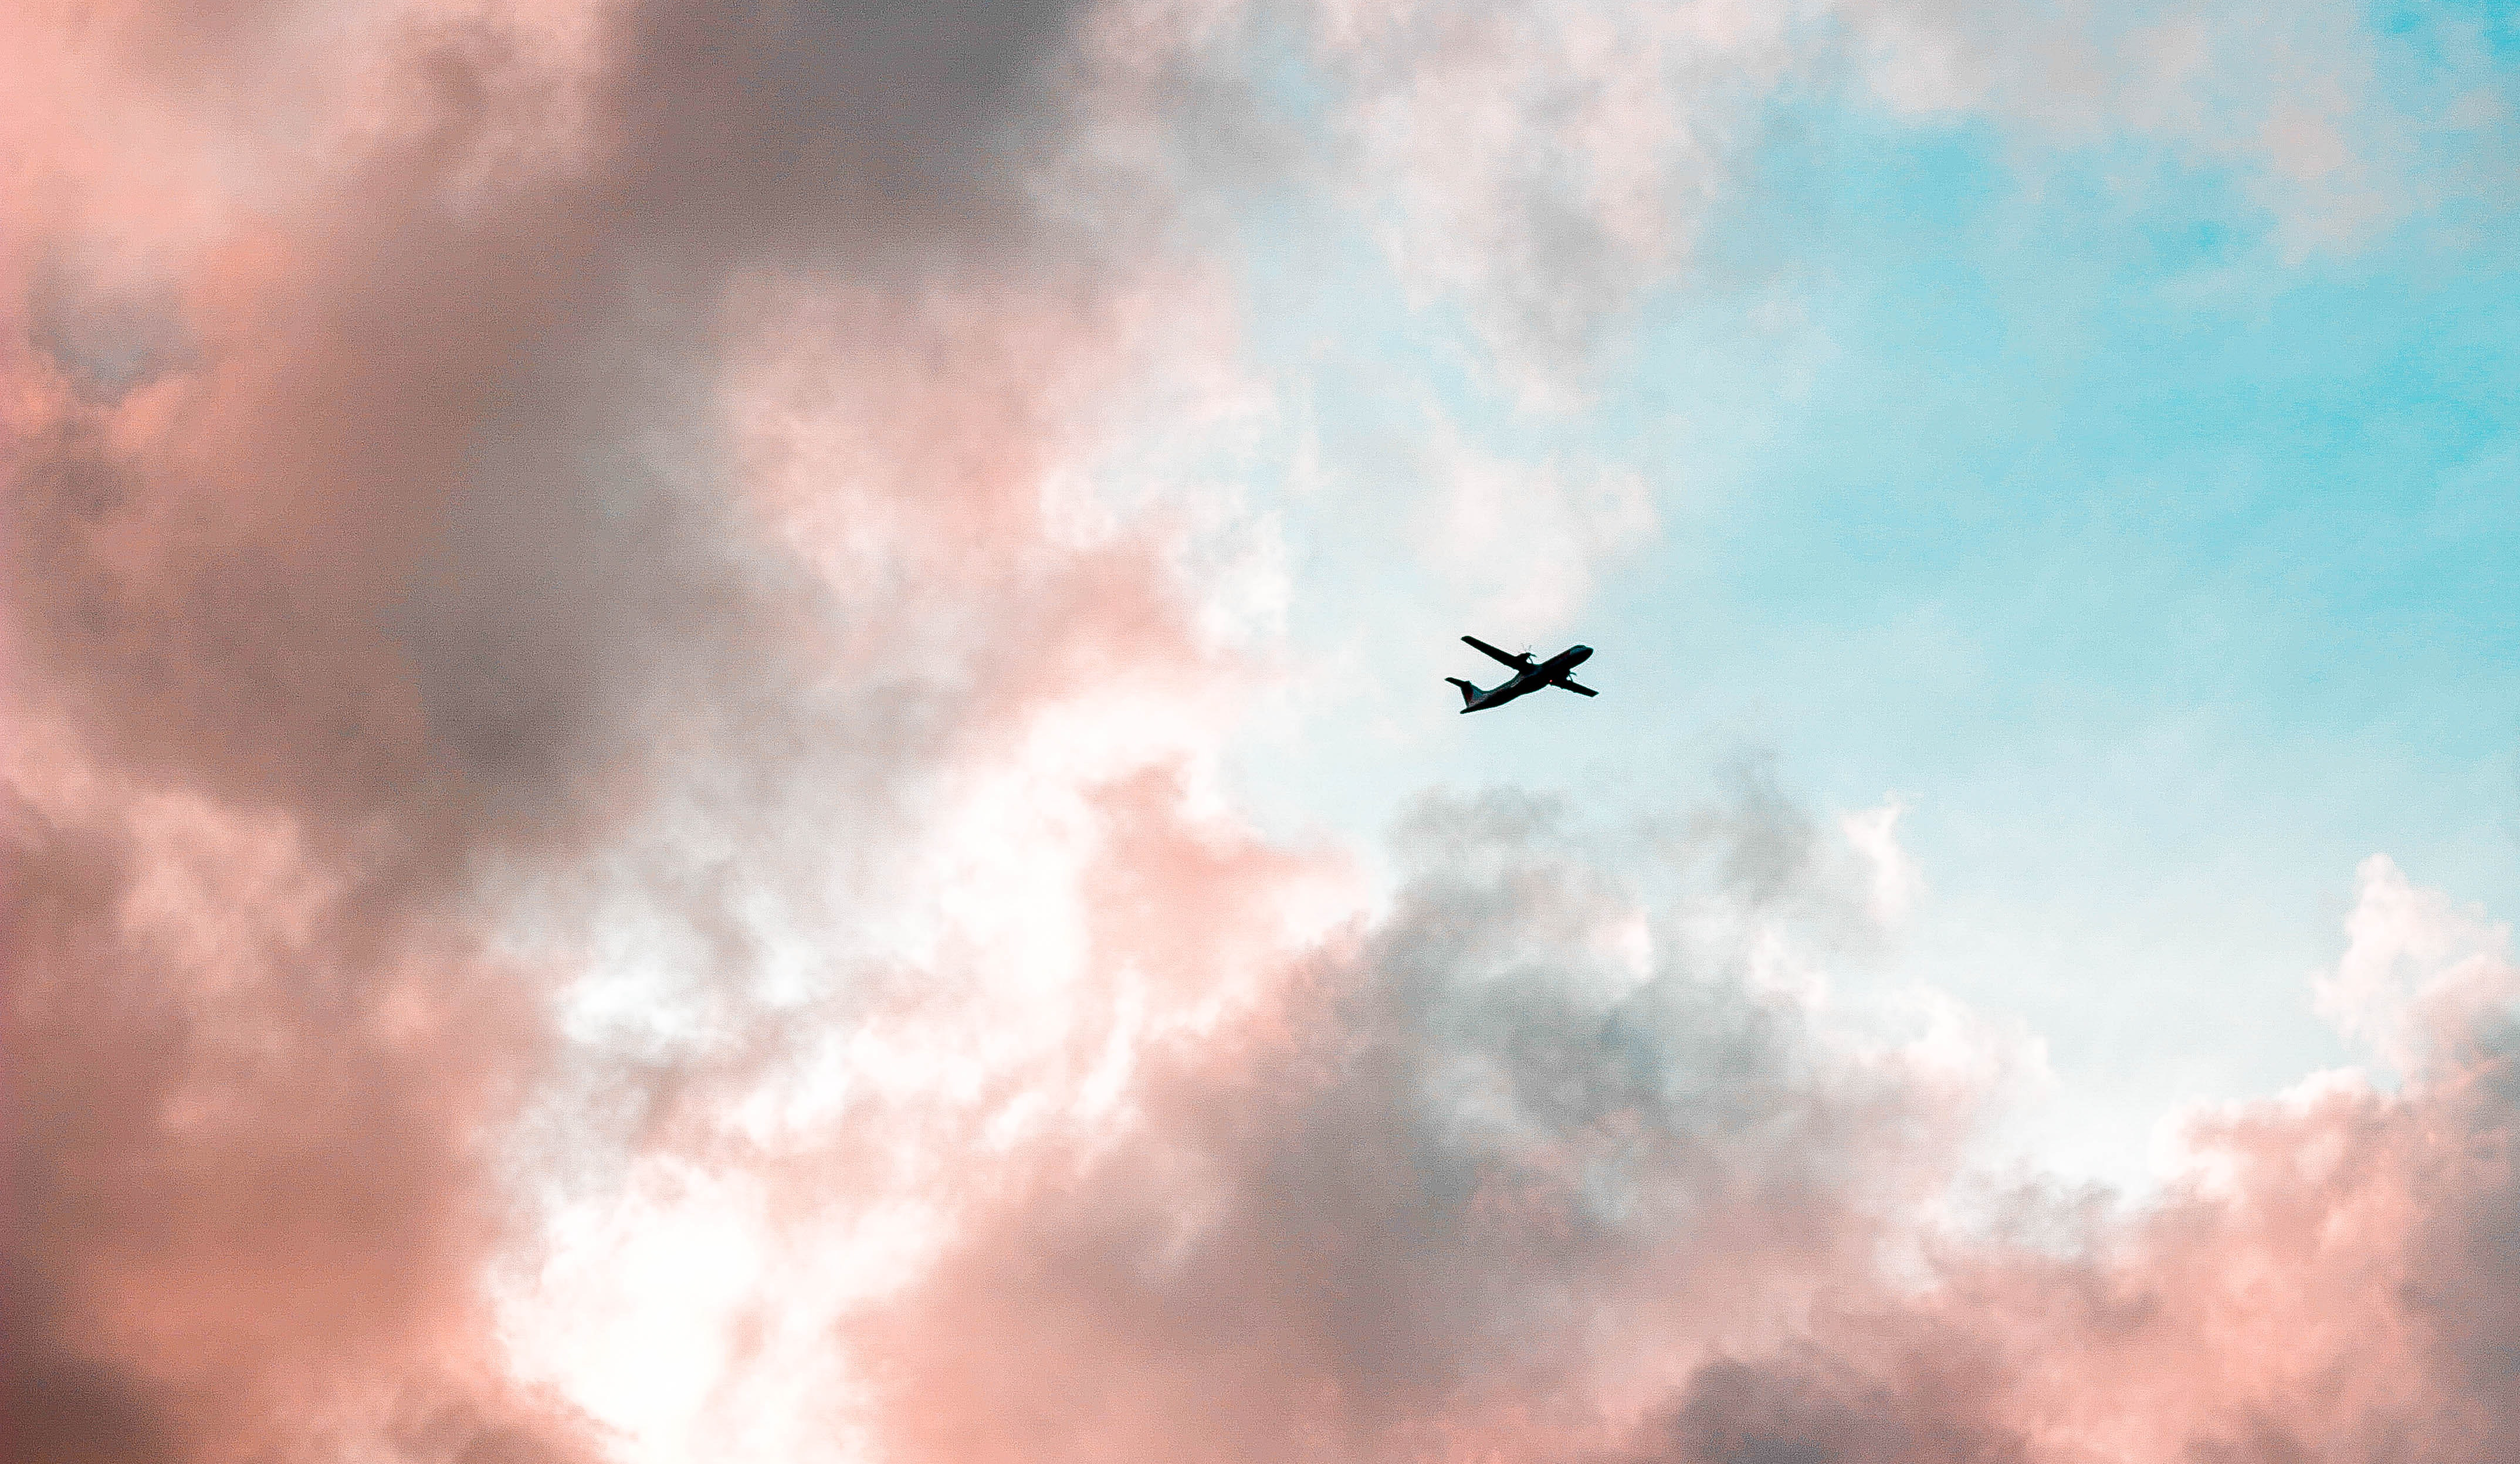 Making aviation sustainable is critical if the EU is to reach its goal of becoming climate-neutral by 2050. Image credit - Nur Andi Ravsanjani Gusma/ Pexels, public domain